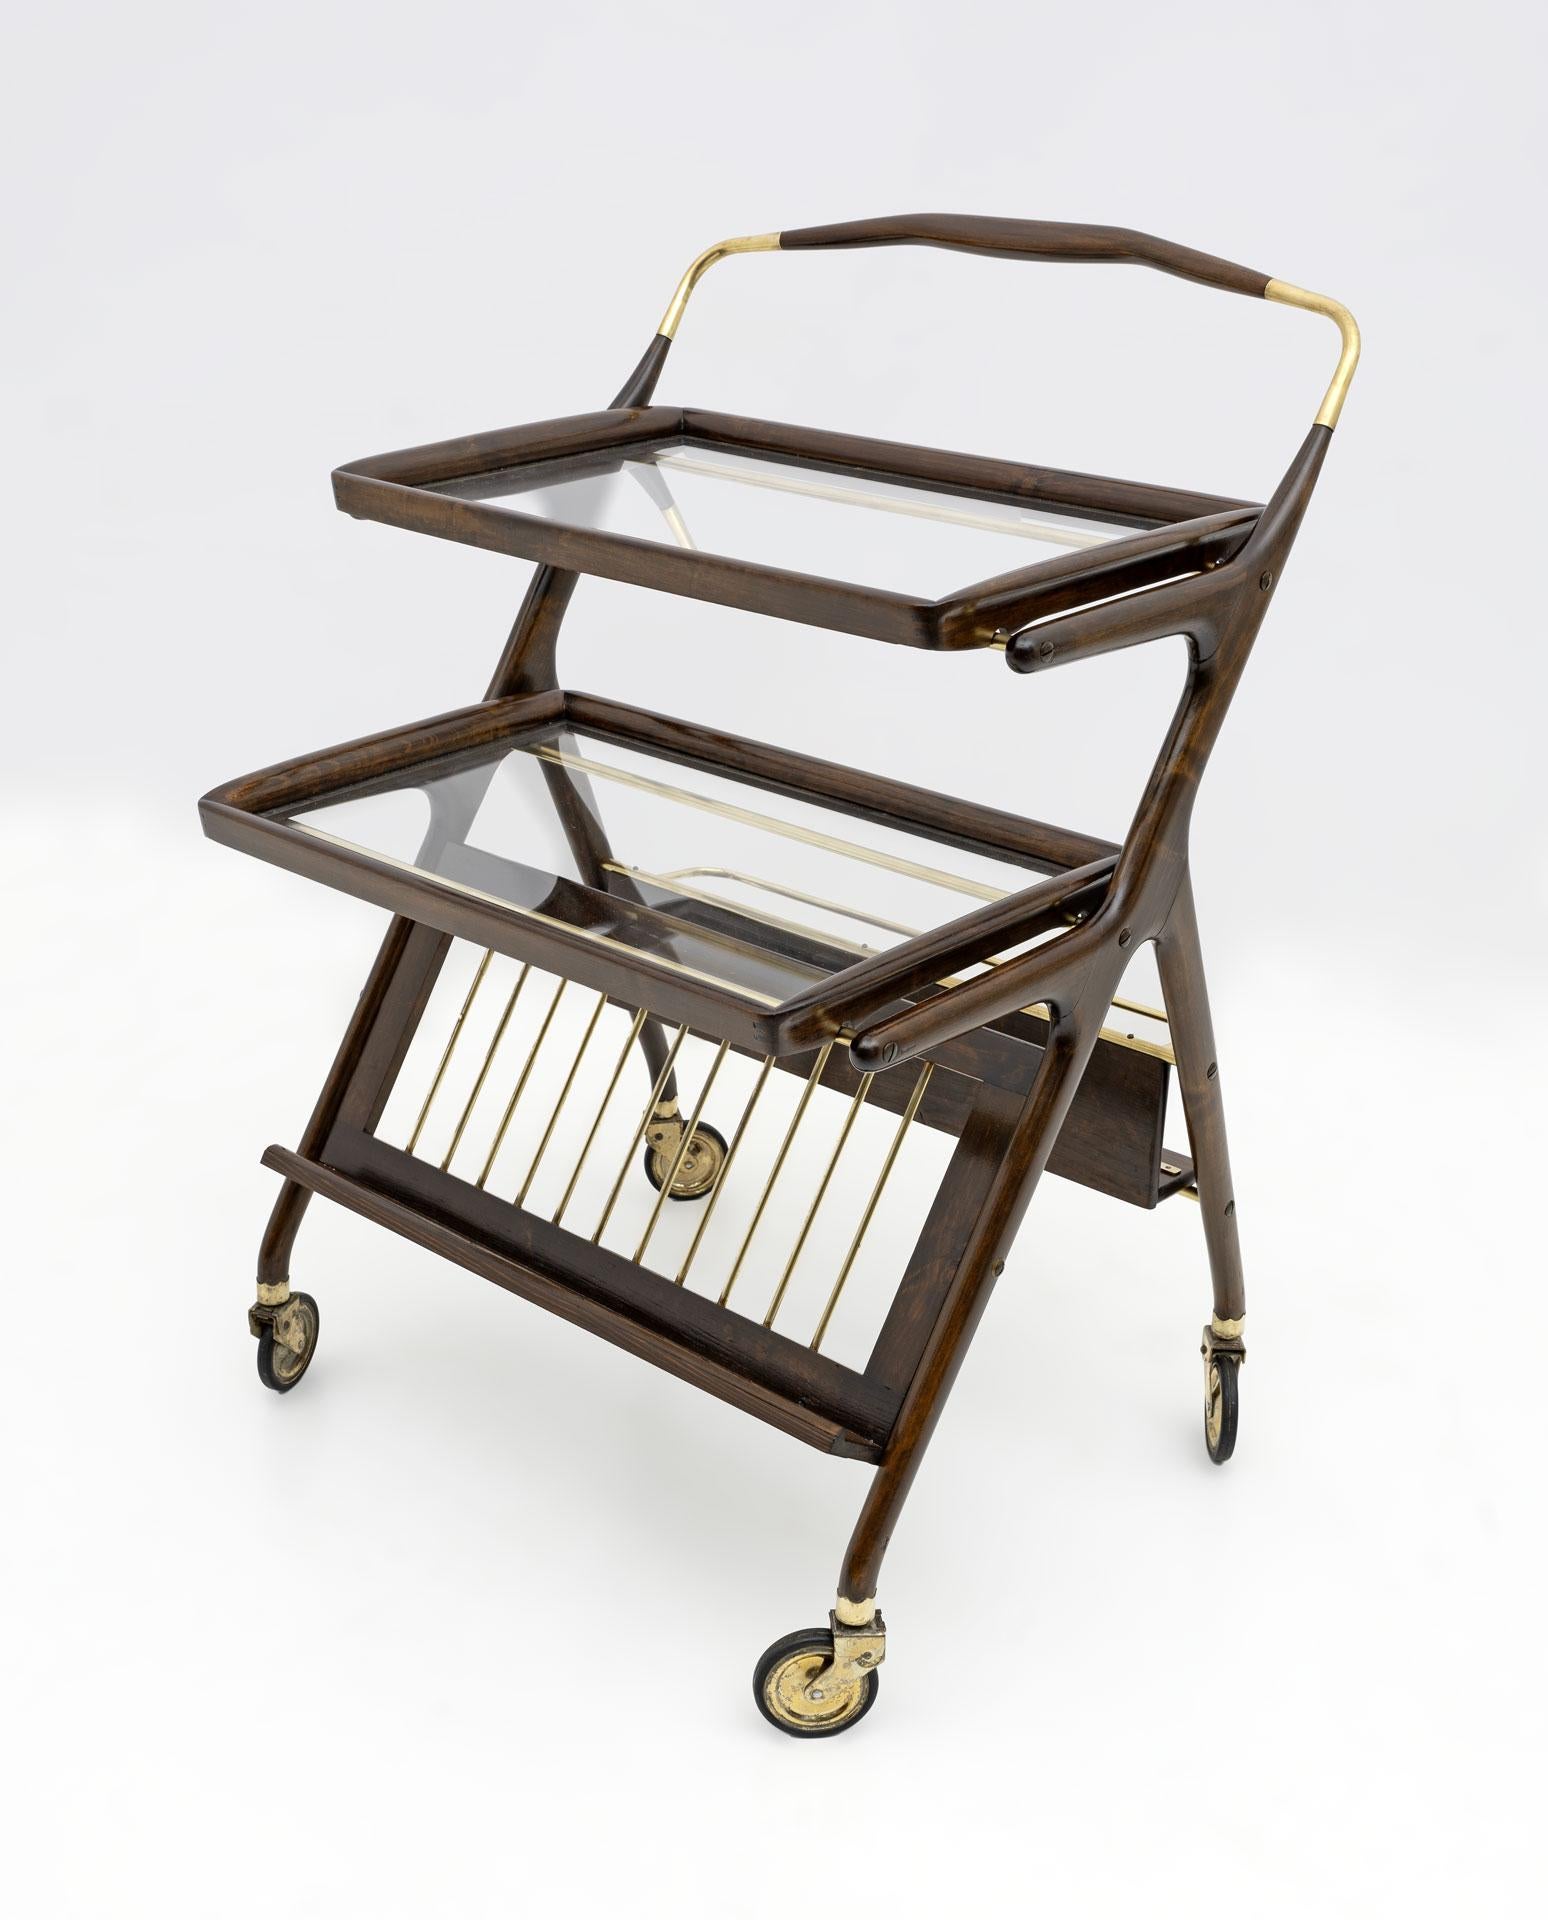 This walnut and brass bar cart was designed by Cesare Lacca for Cassina in the 1950s. It features two removable trays and a front and rear bottom shelf for bottles.
Completely restored and shellac polished